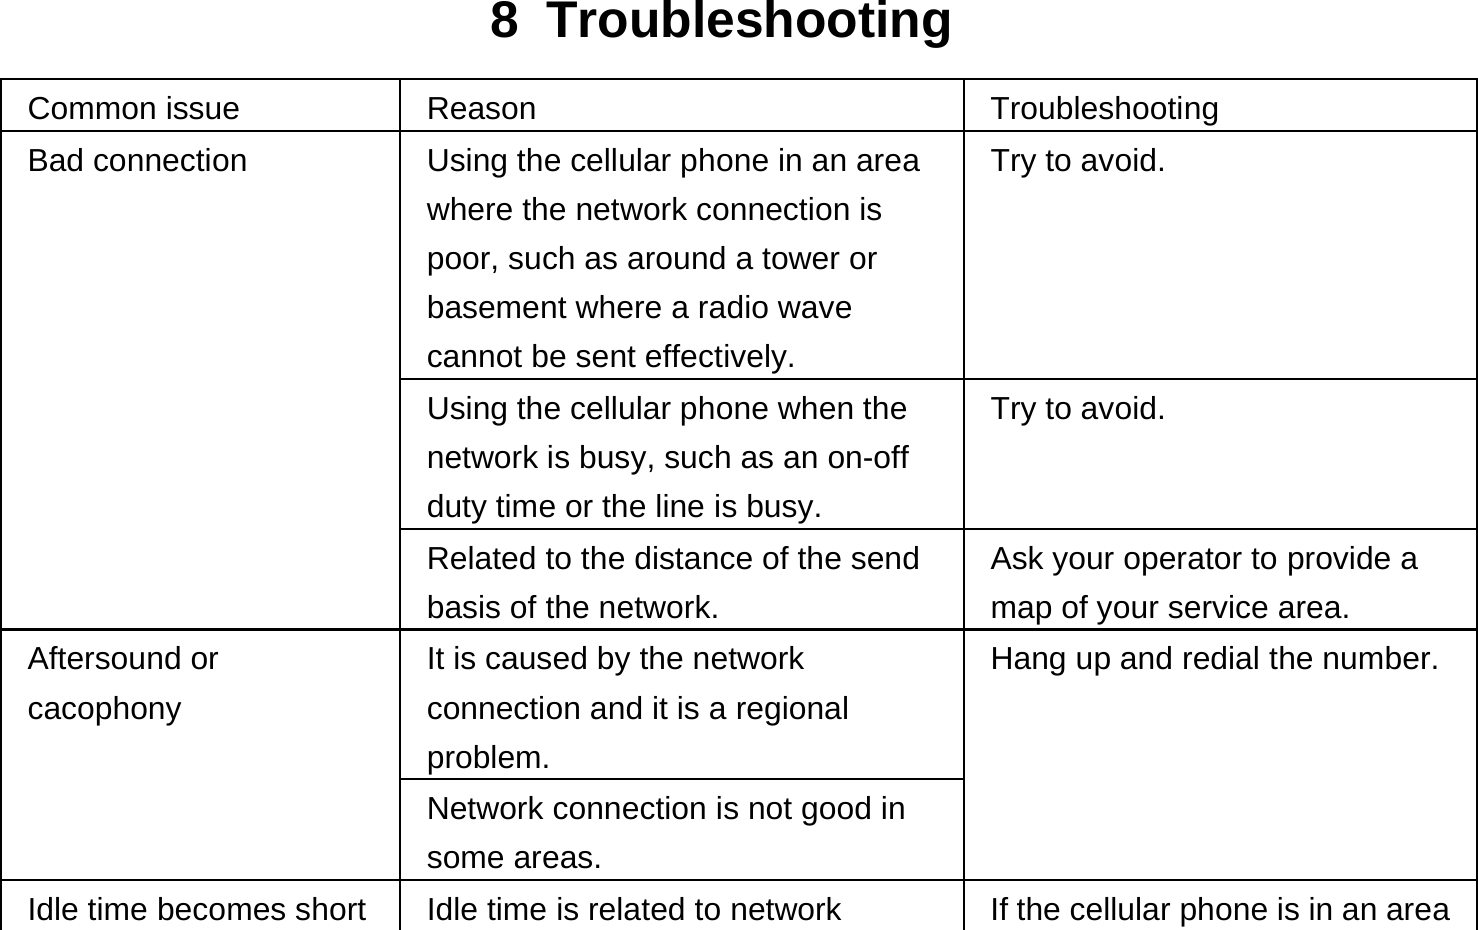  8 Troubleshooting Common issue  Reason  Troubleshooting Bad connection  Using the cellular phone in an area where the network connection is poor, such as around a tower or basement where a radio wave cannot be sent effectively.   Try to avoid. Using the cellular phone when the network is busy, such as an on-off duty time or the line is busy. Try to avoid. Related to the distance of the send basis of the network. Ask your operator to provide a map of your service area. Aftersound or cacophony It is caused by the network connection and it is a regional problem. Hang up and redial the number. Network connection is not good in some areas. Idle time becomes short  Idle time is related to network  If the cellular phone is in an area 